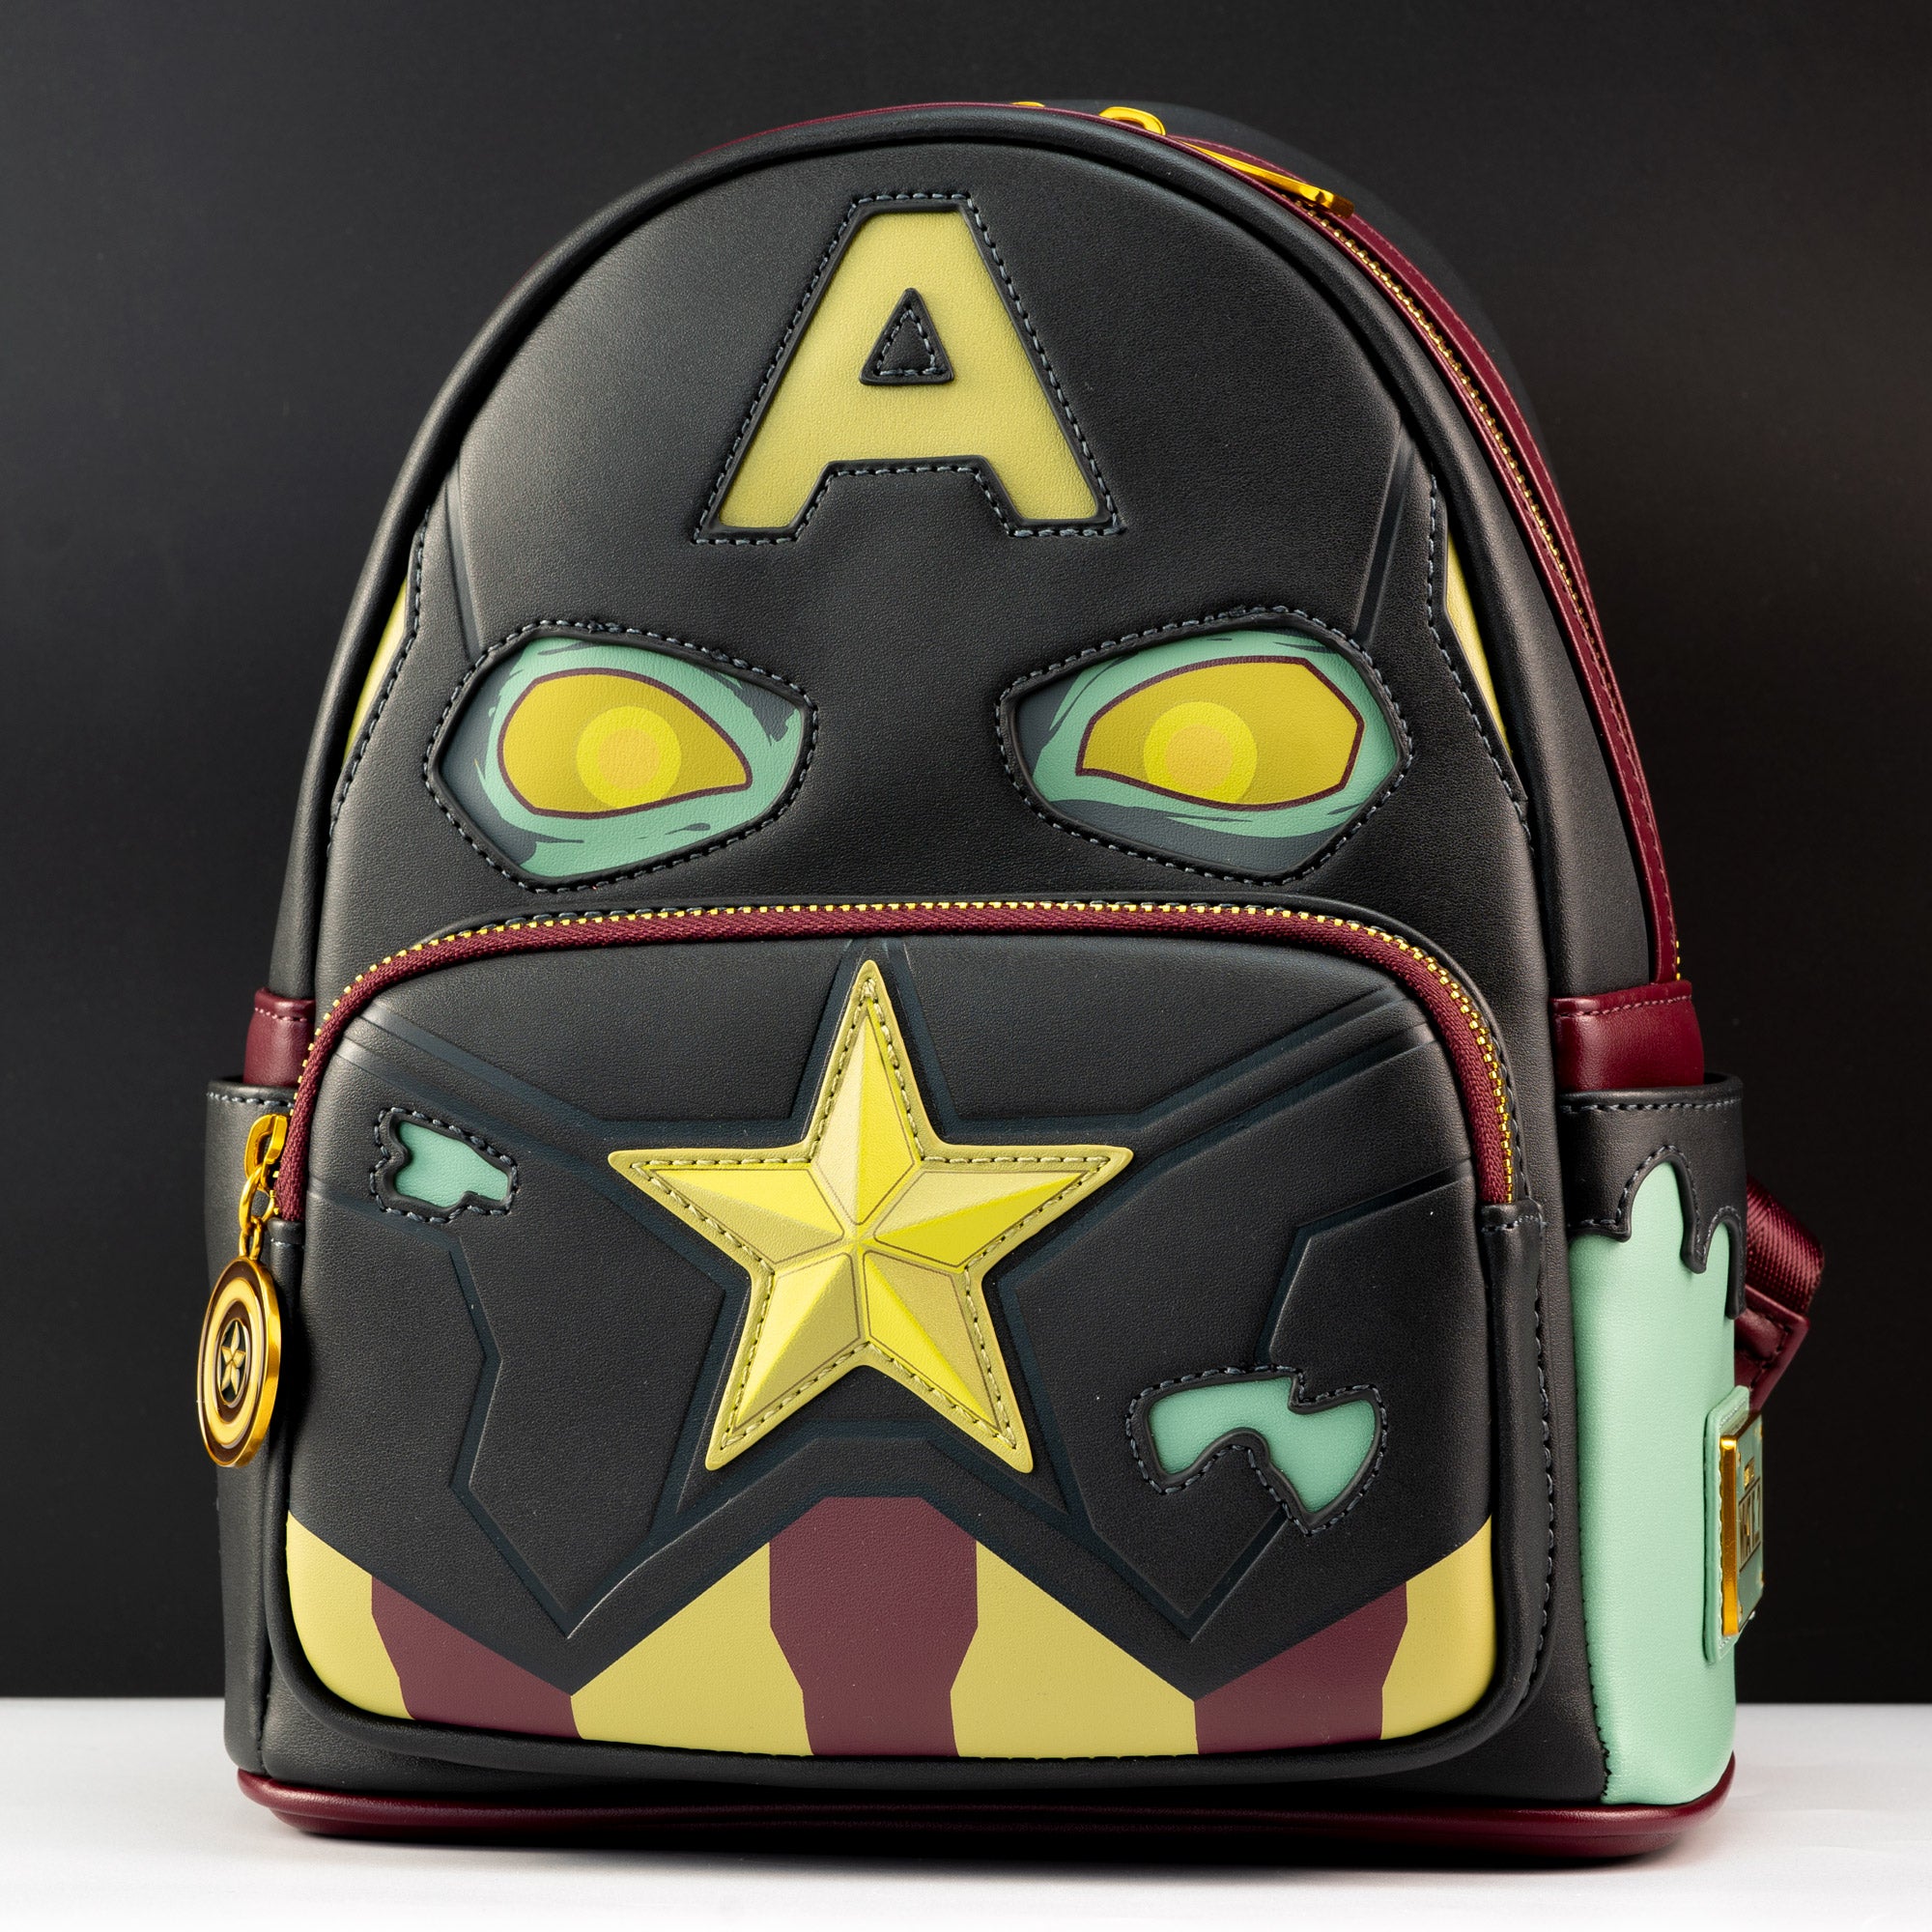 Loungefly x Marvel 'What If?' Captain America Zombie Cosplay Mini Backpack